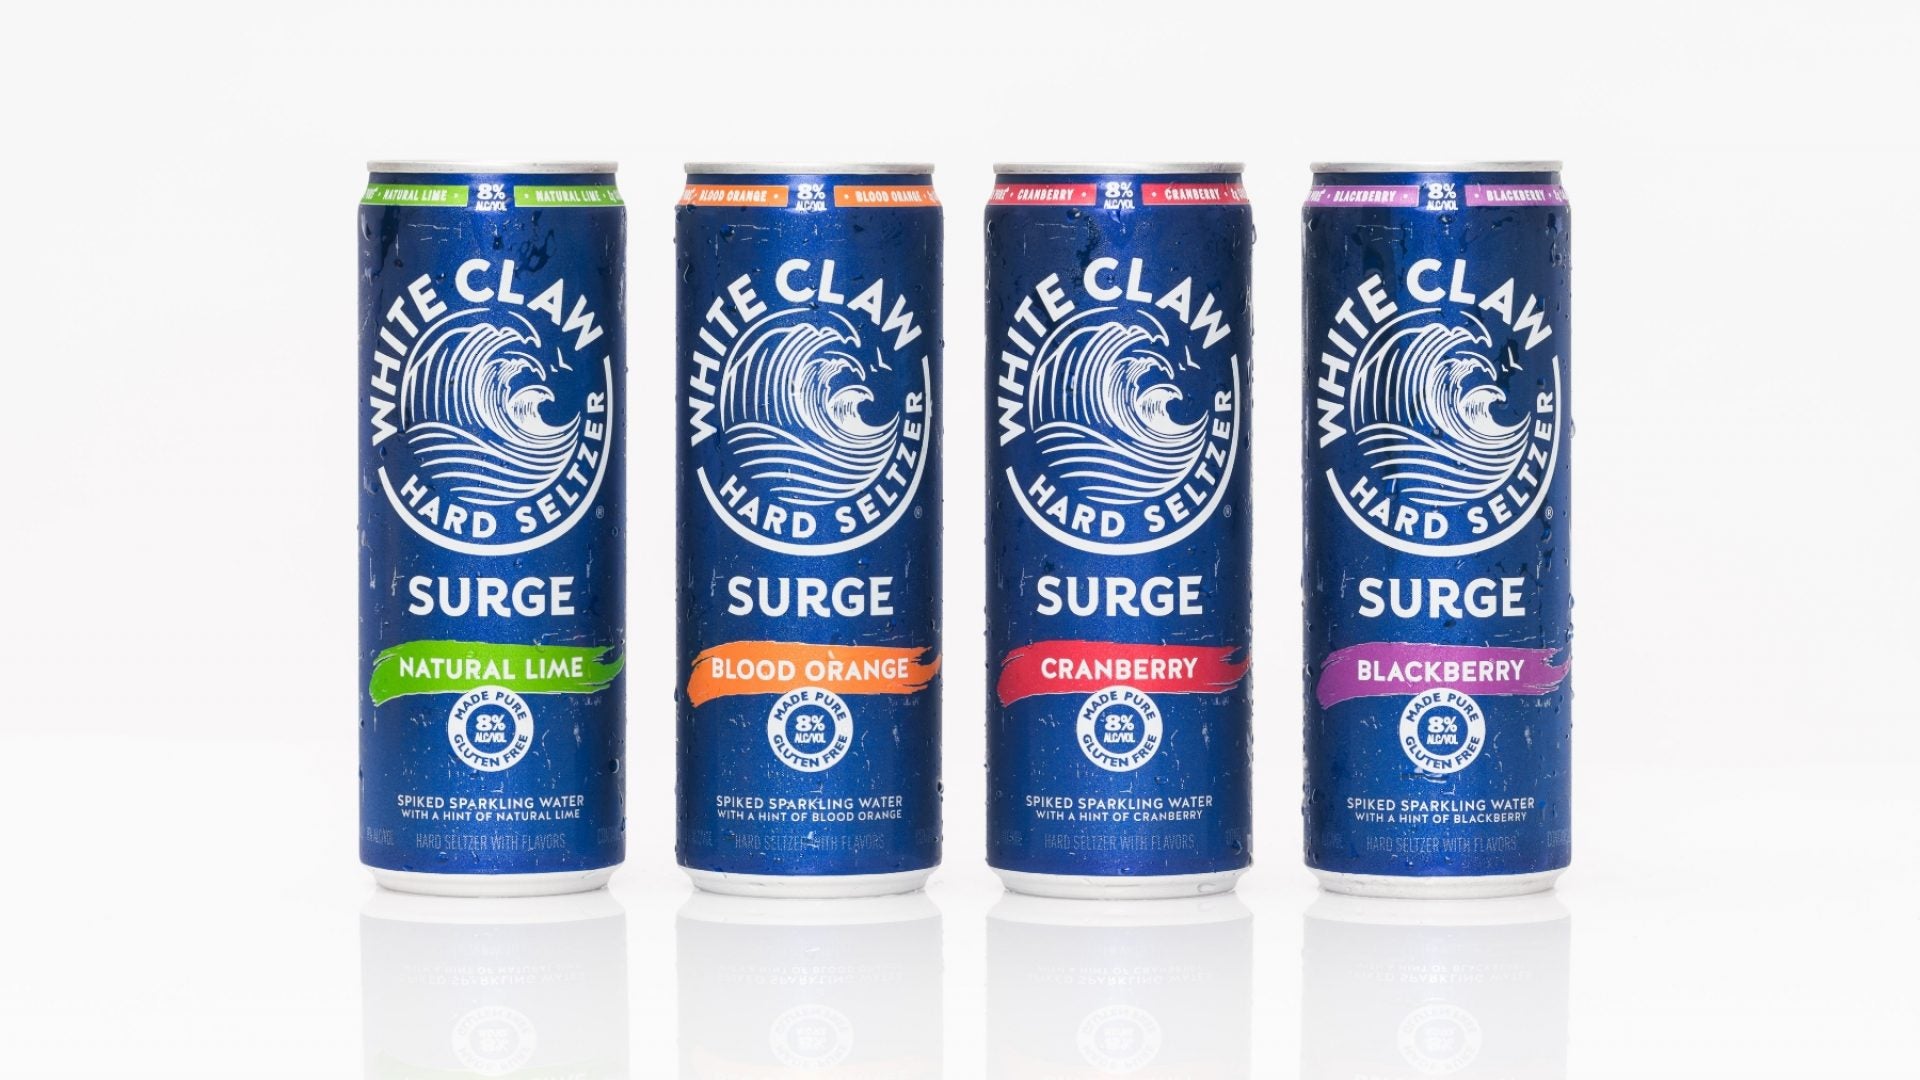 Let's Toast: White Claw Hard Seltzer Surge